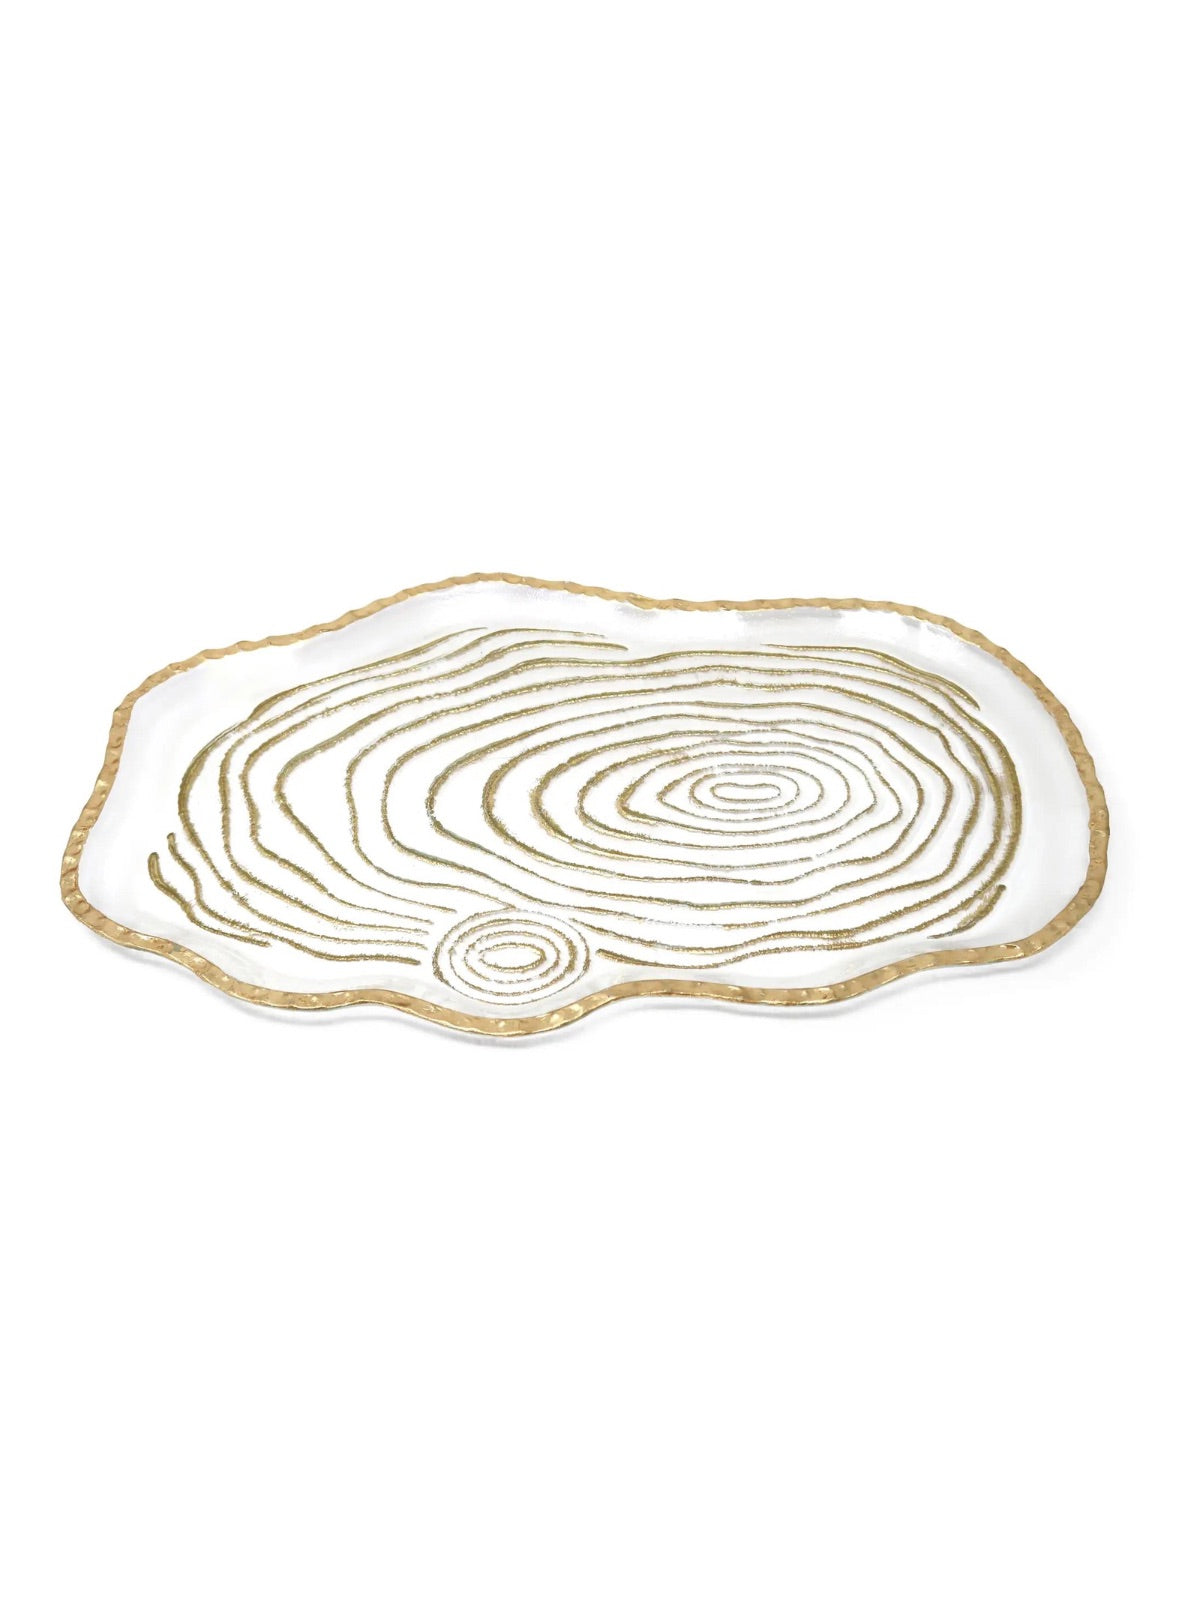 Glass Oval Tray with Gold Grained Design, Measuring 16 inches.